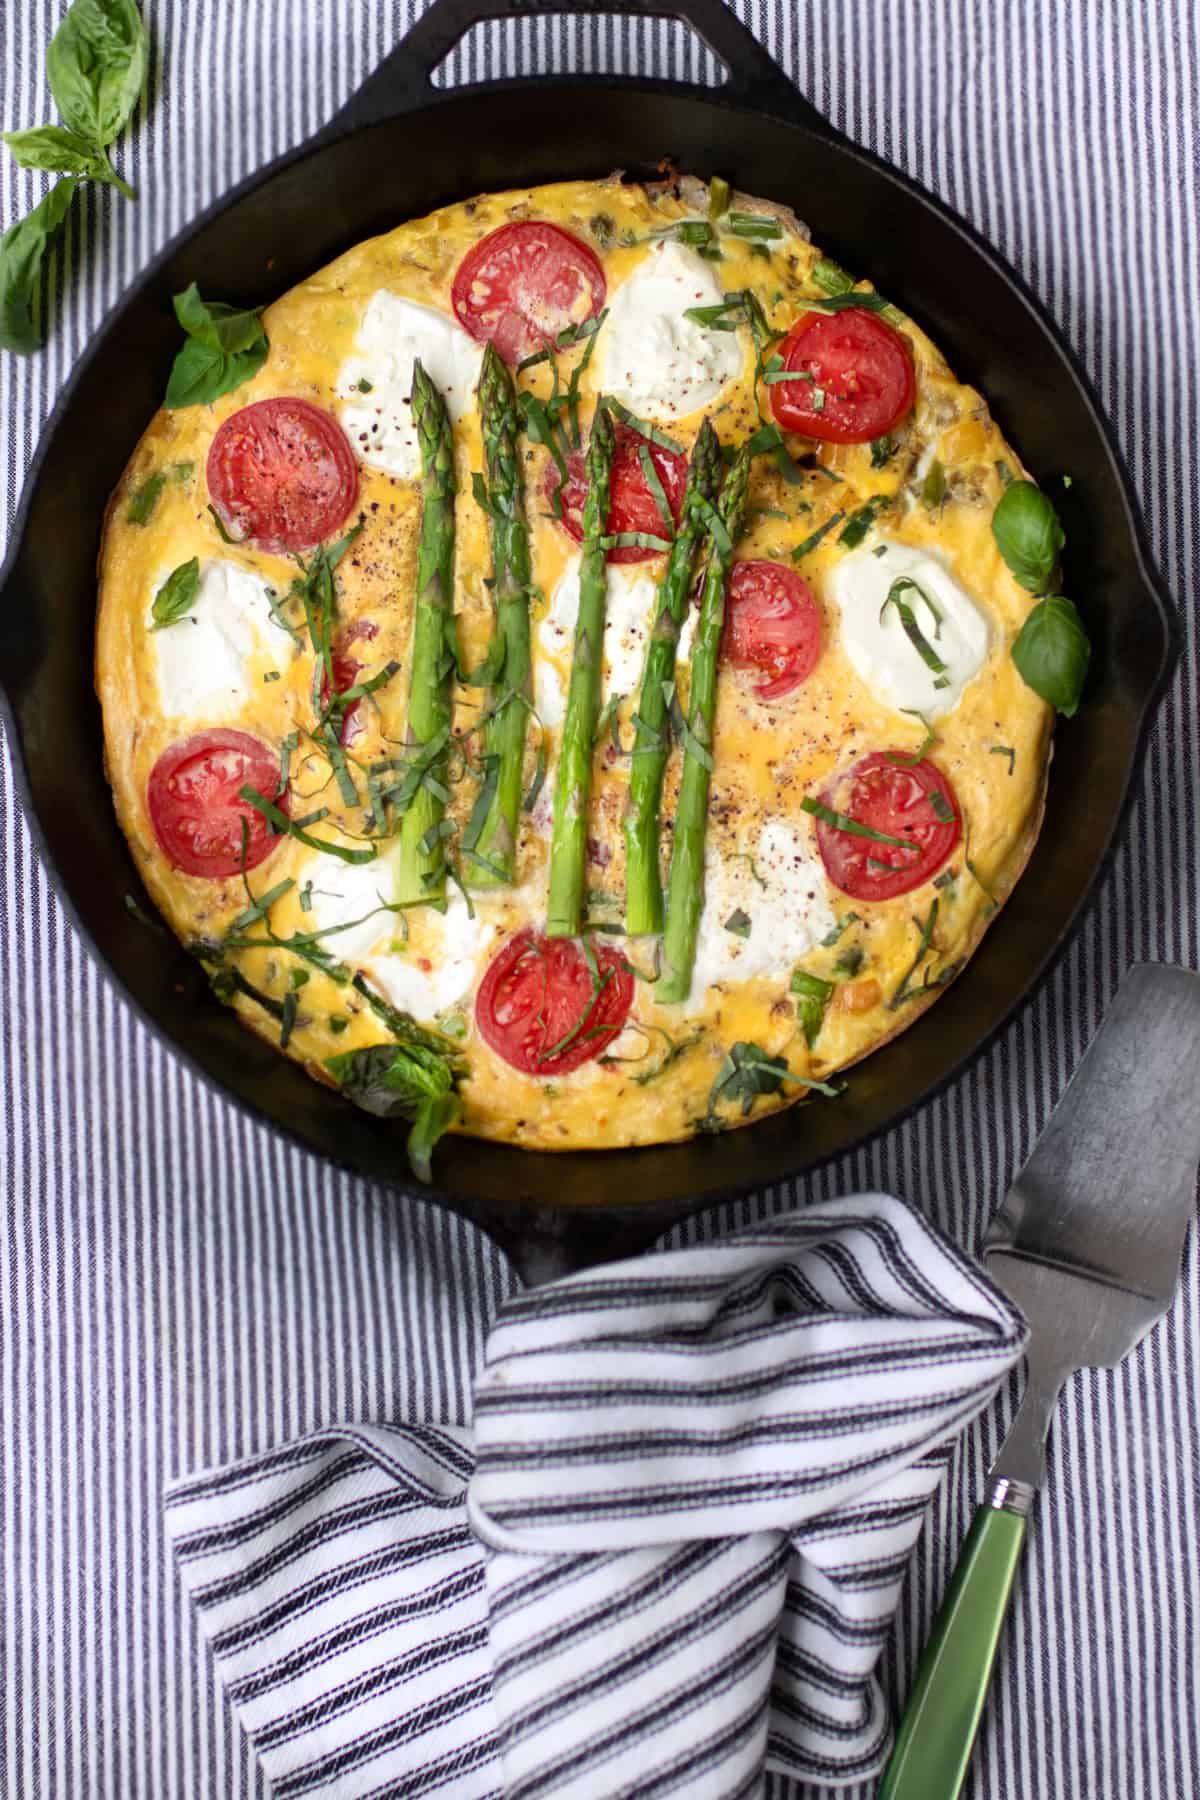 Cast iron skillet filled with a frittata decorated with rounds of goat cheese, sliced cherry tomatoes and 5 asparagus spears.